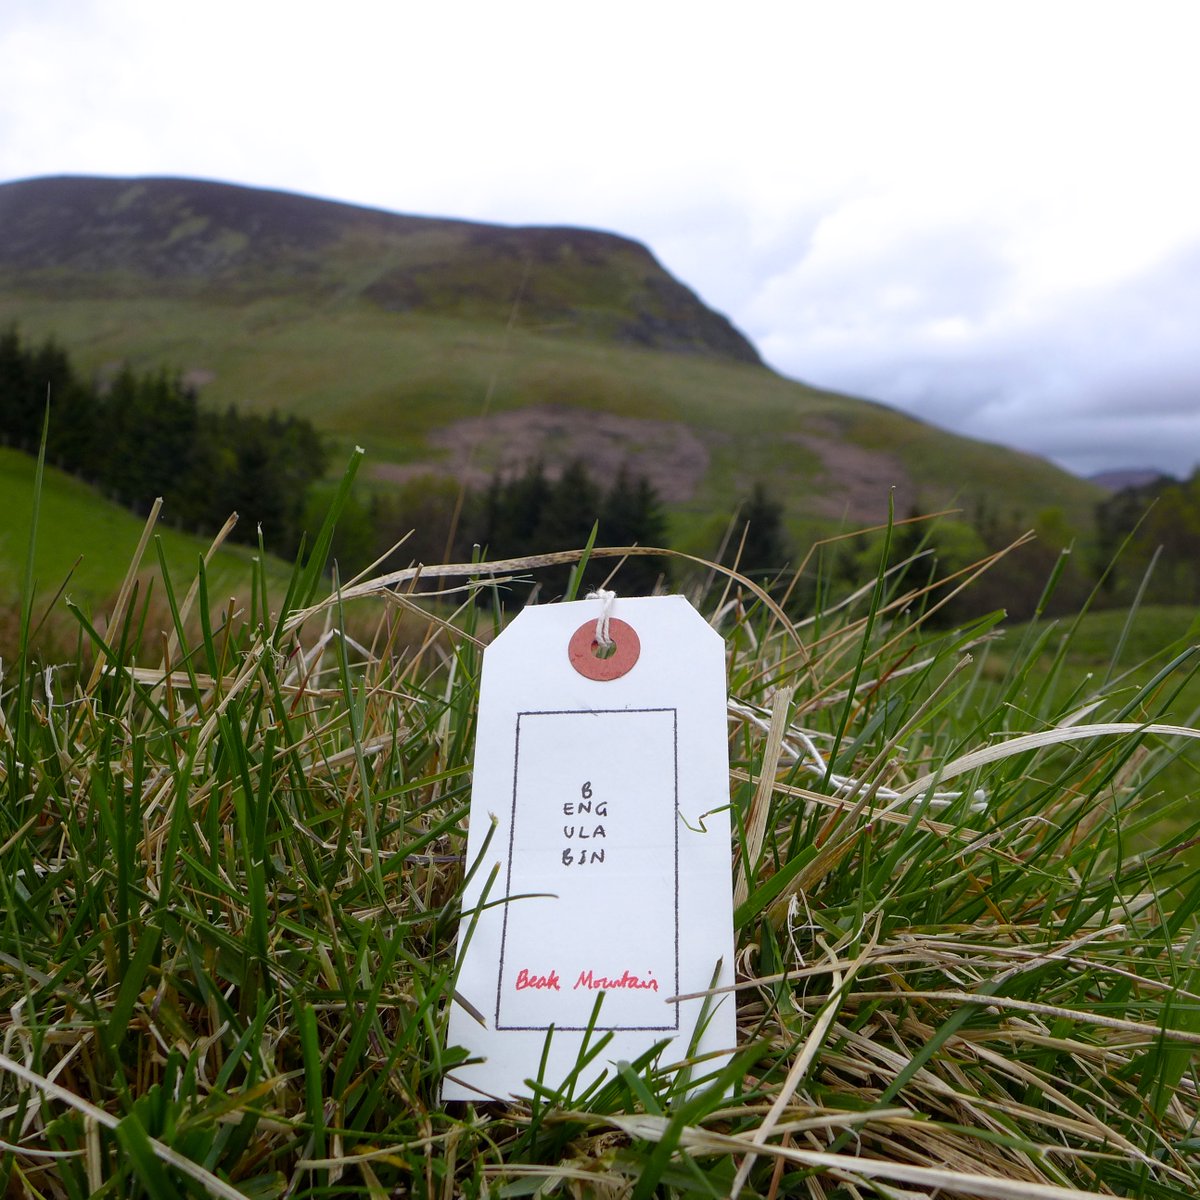 word-mntn (Ben Gulabin), beak mountain, by Diarmid's Grave, Glenshee, fairy-glen; the site of his struggle with the fairy boar. Hamish Henderson's ashes are interred on the summit. Myth, reality, and mythic reality.